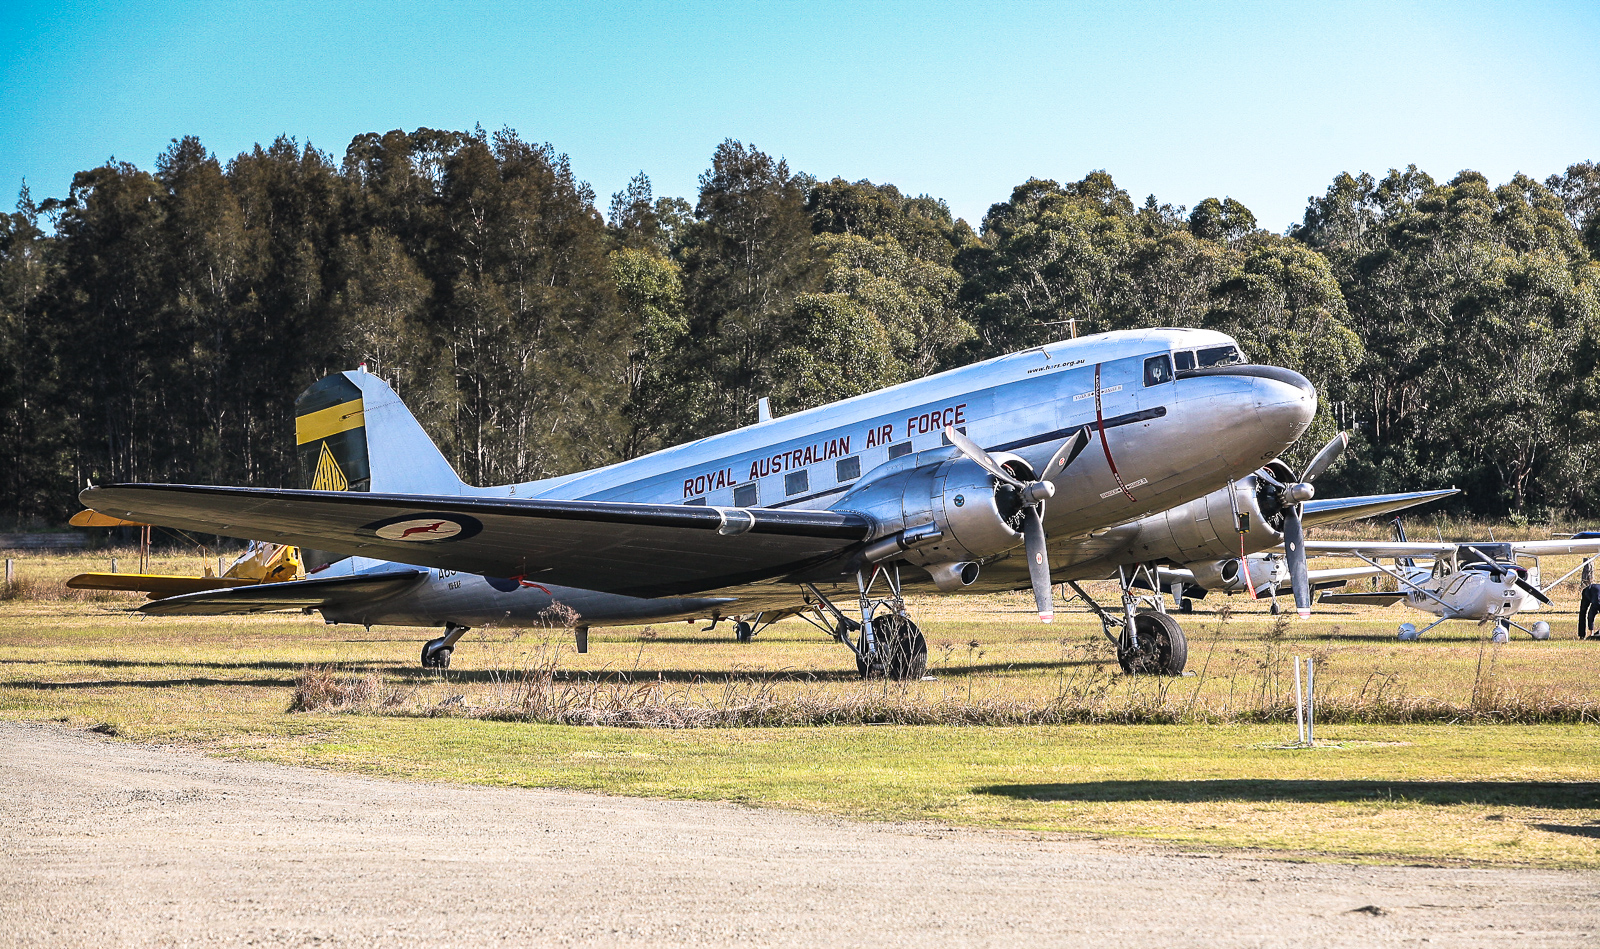 HARS C-47B Dakota parked on the opposite side of the viewing area at Maitland. (photo by Phil Buckley)